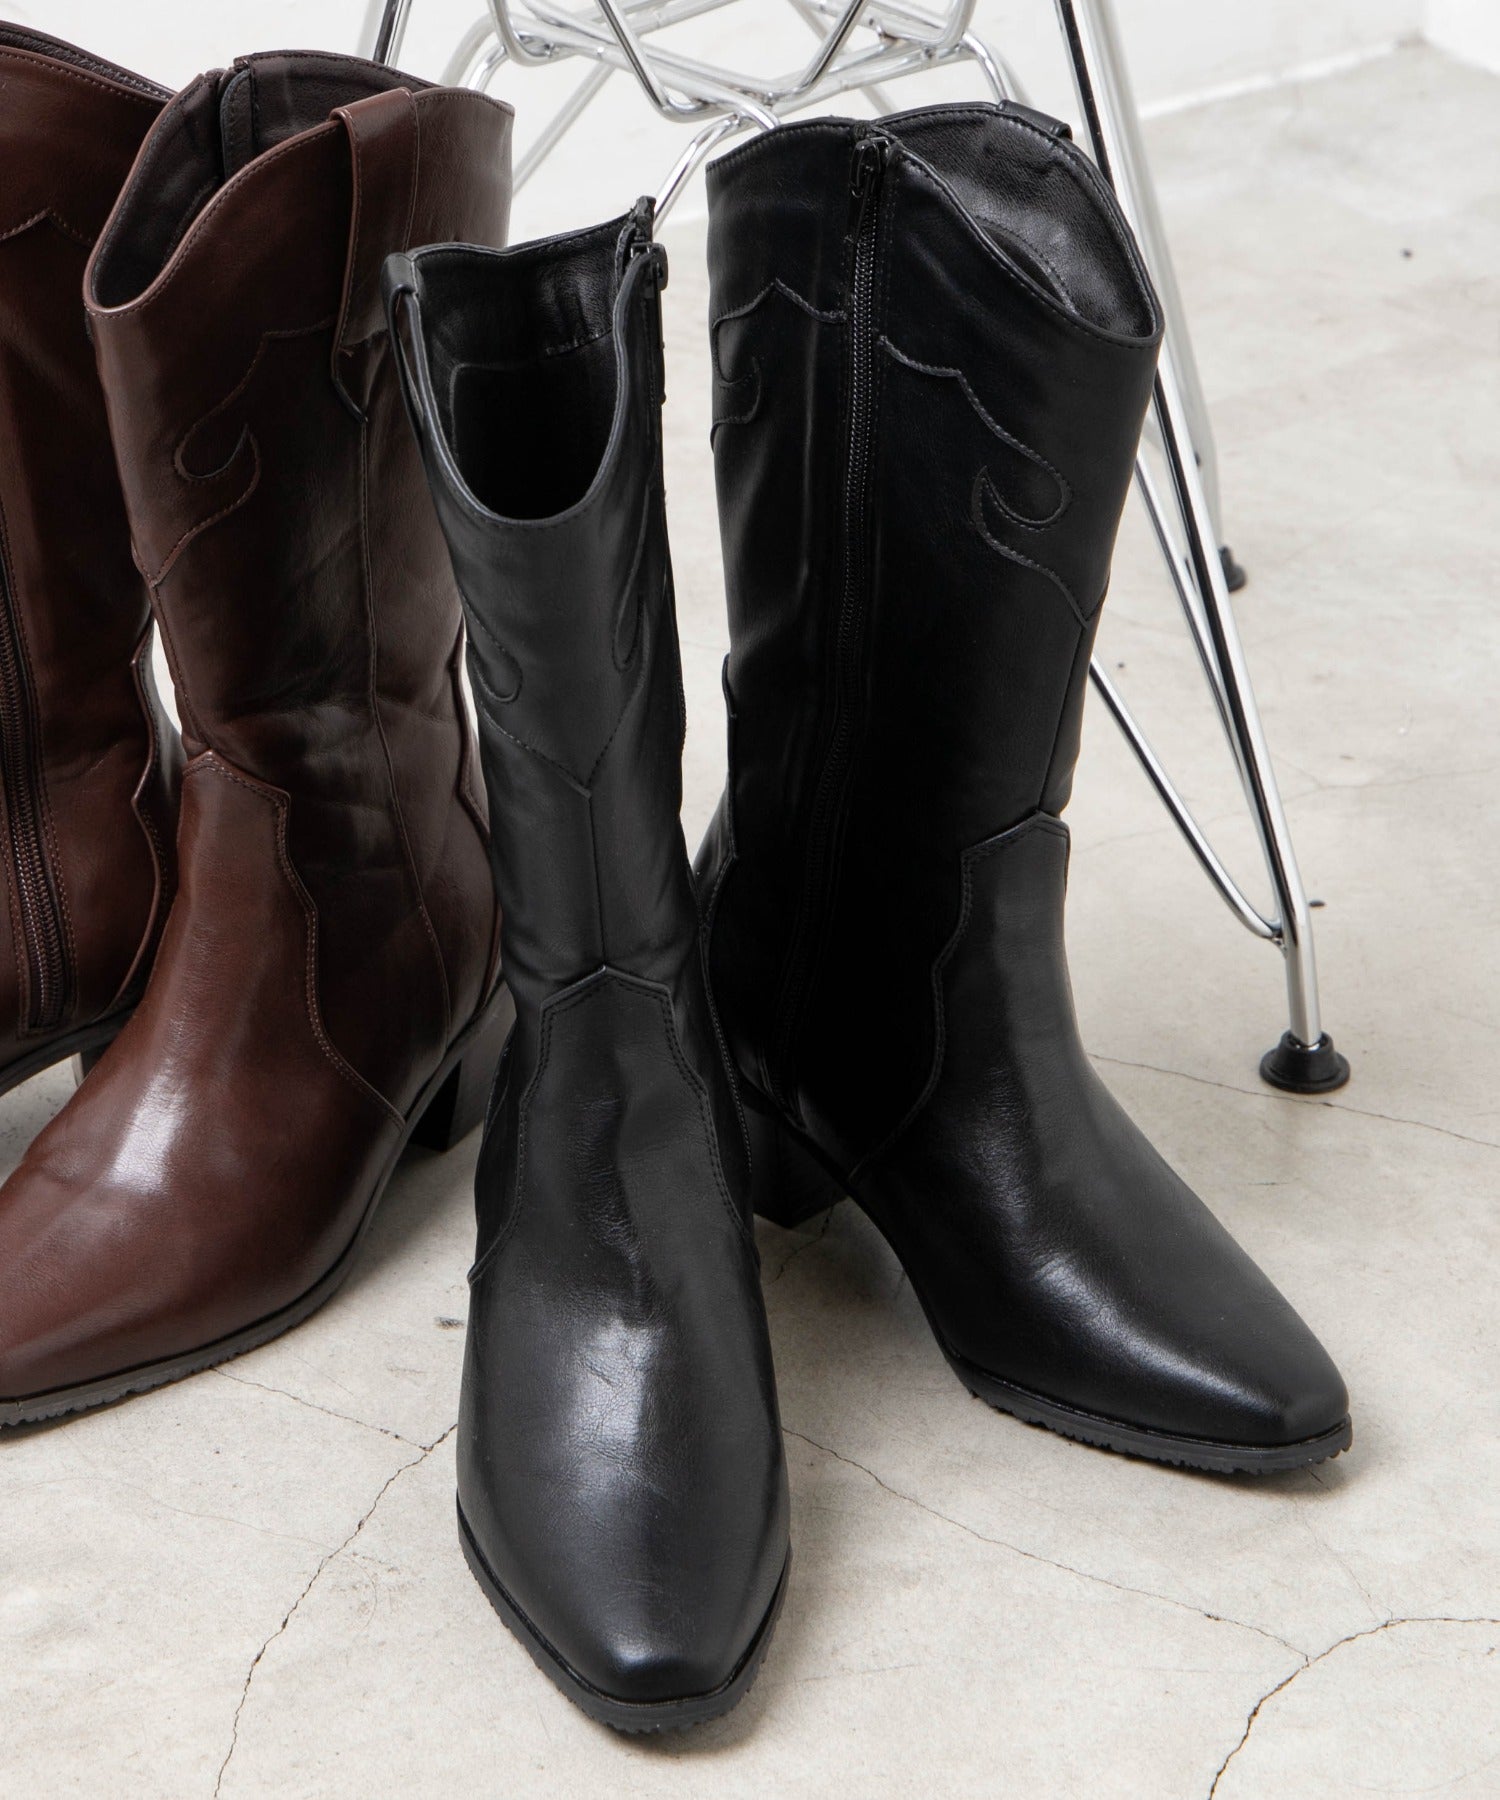 ION POINTED BOOTS | fitwellbathfitting.com